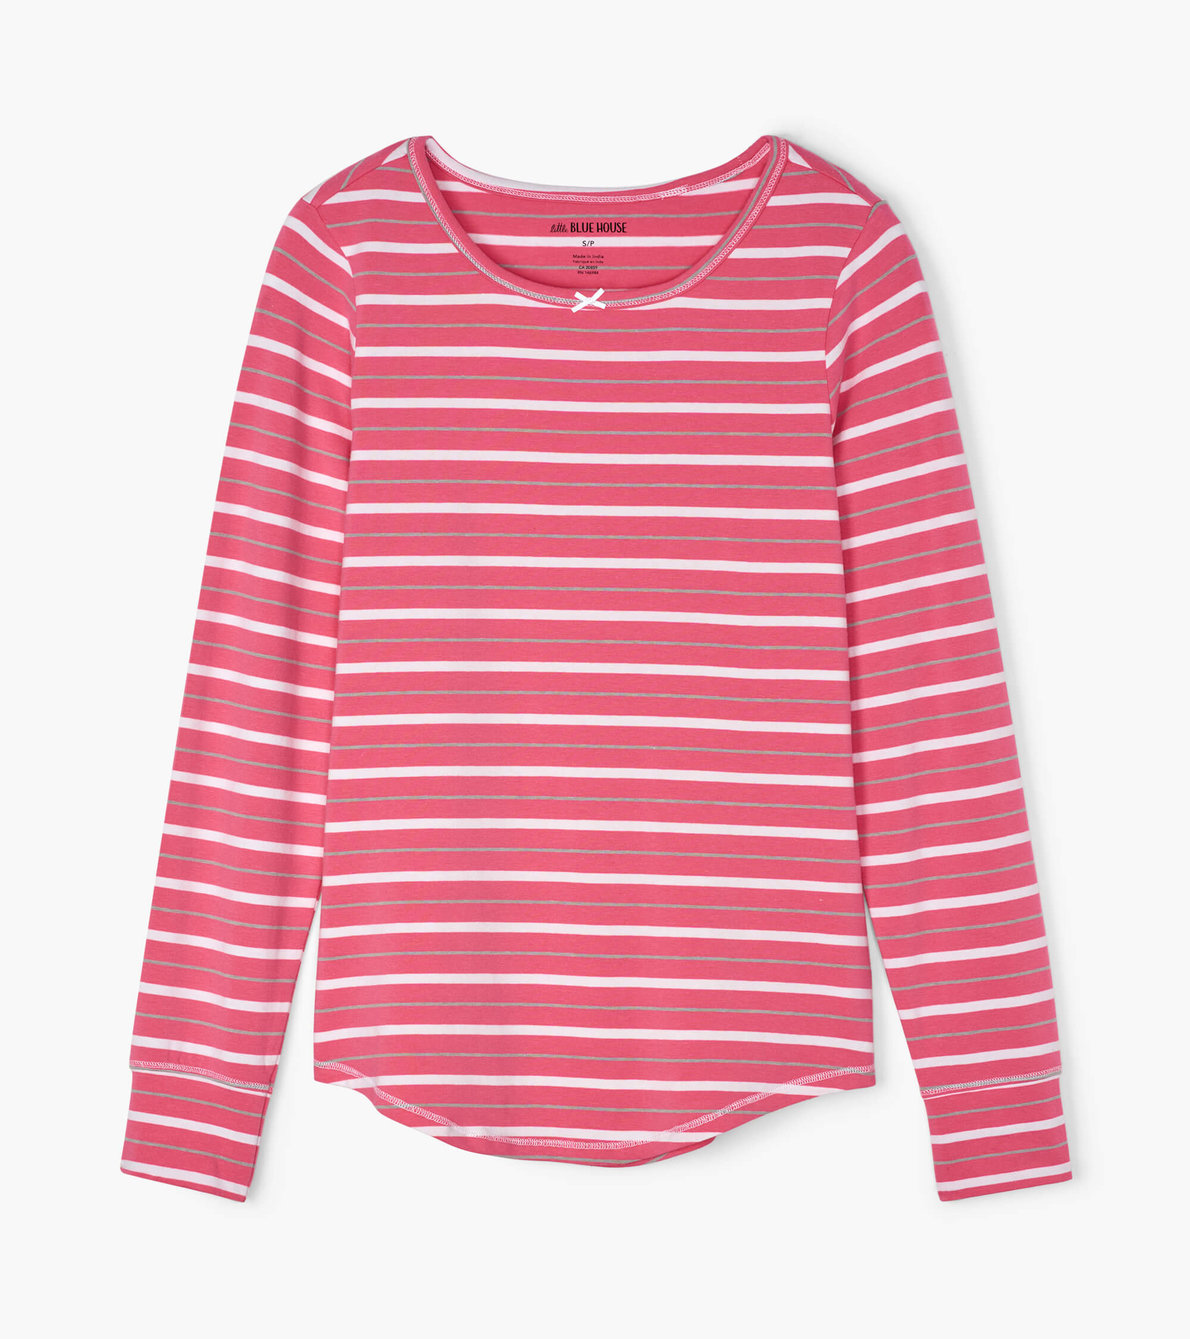 View larger image of Christmas Village Stripe Women's Stretch Jersey Top